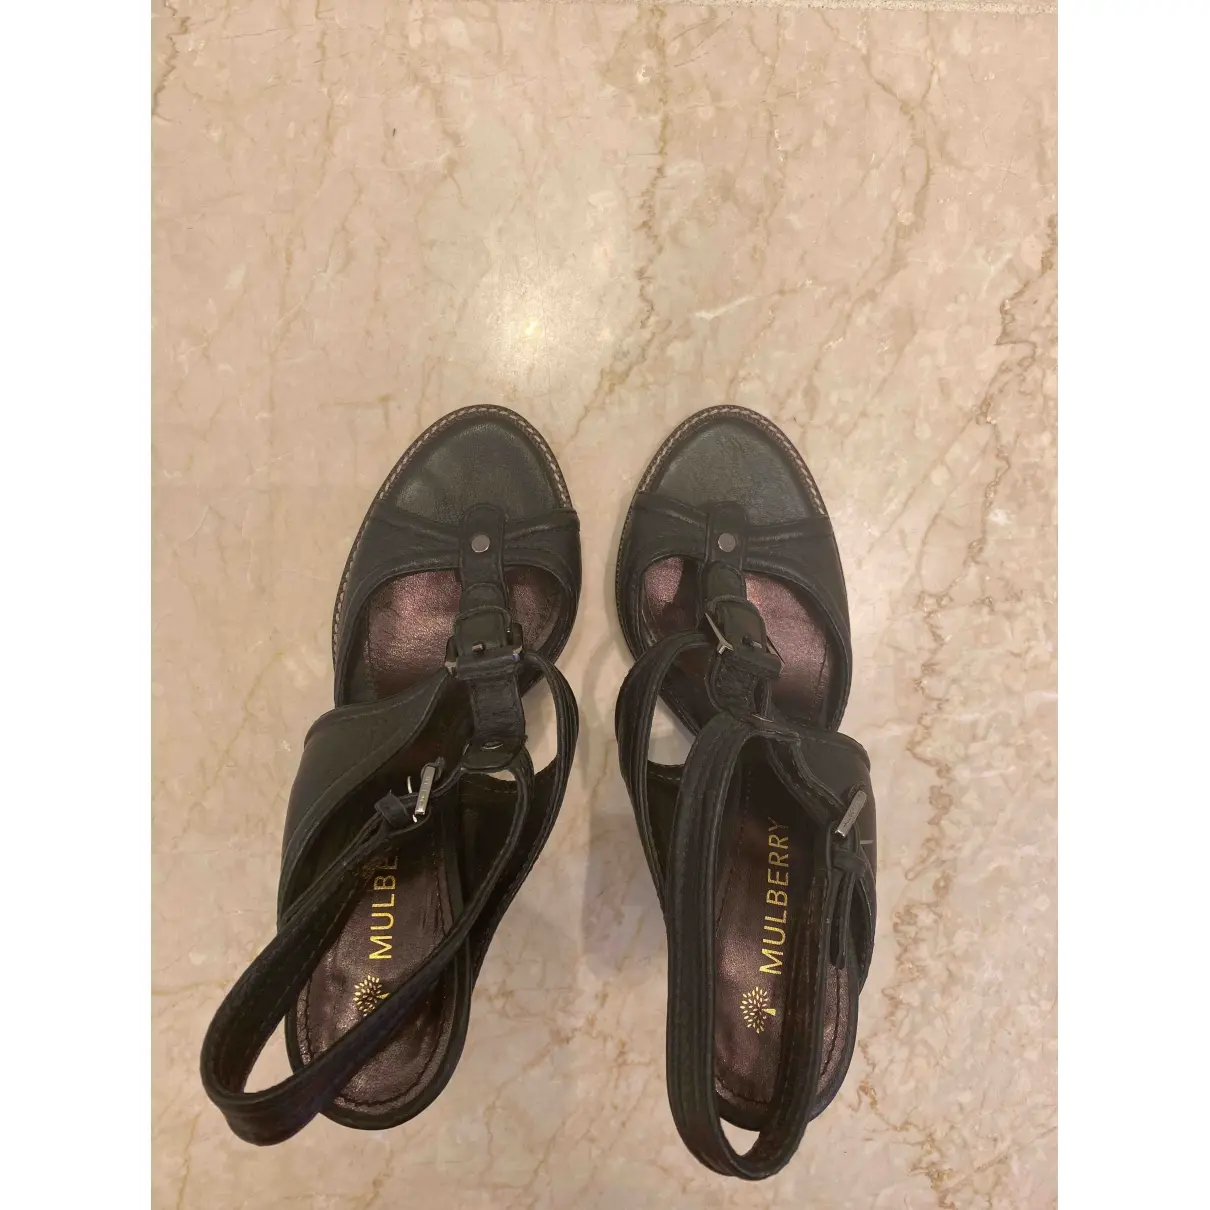 Mulberry Leather sandals for sale